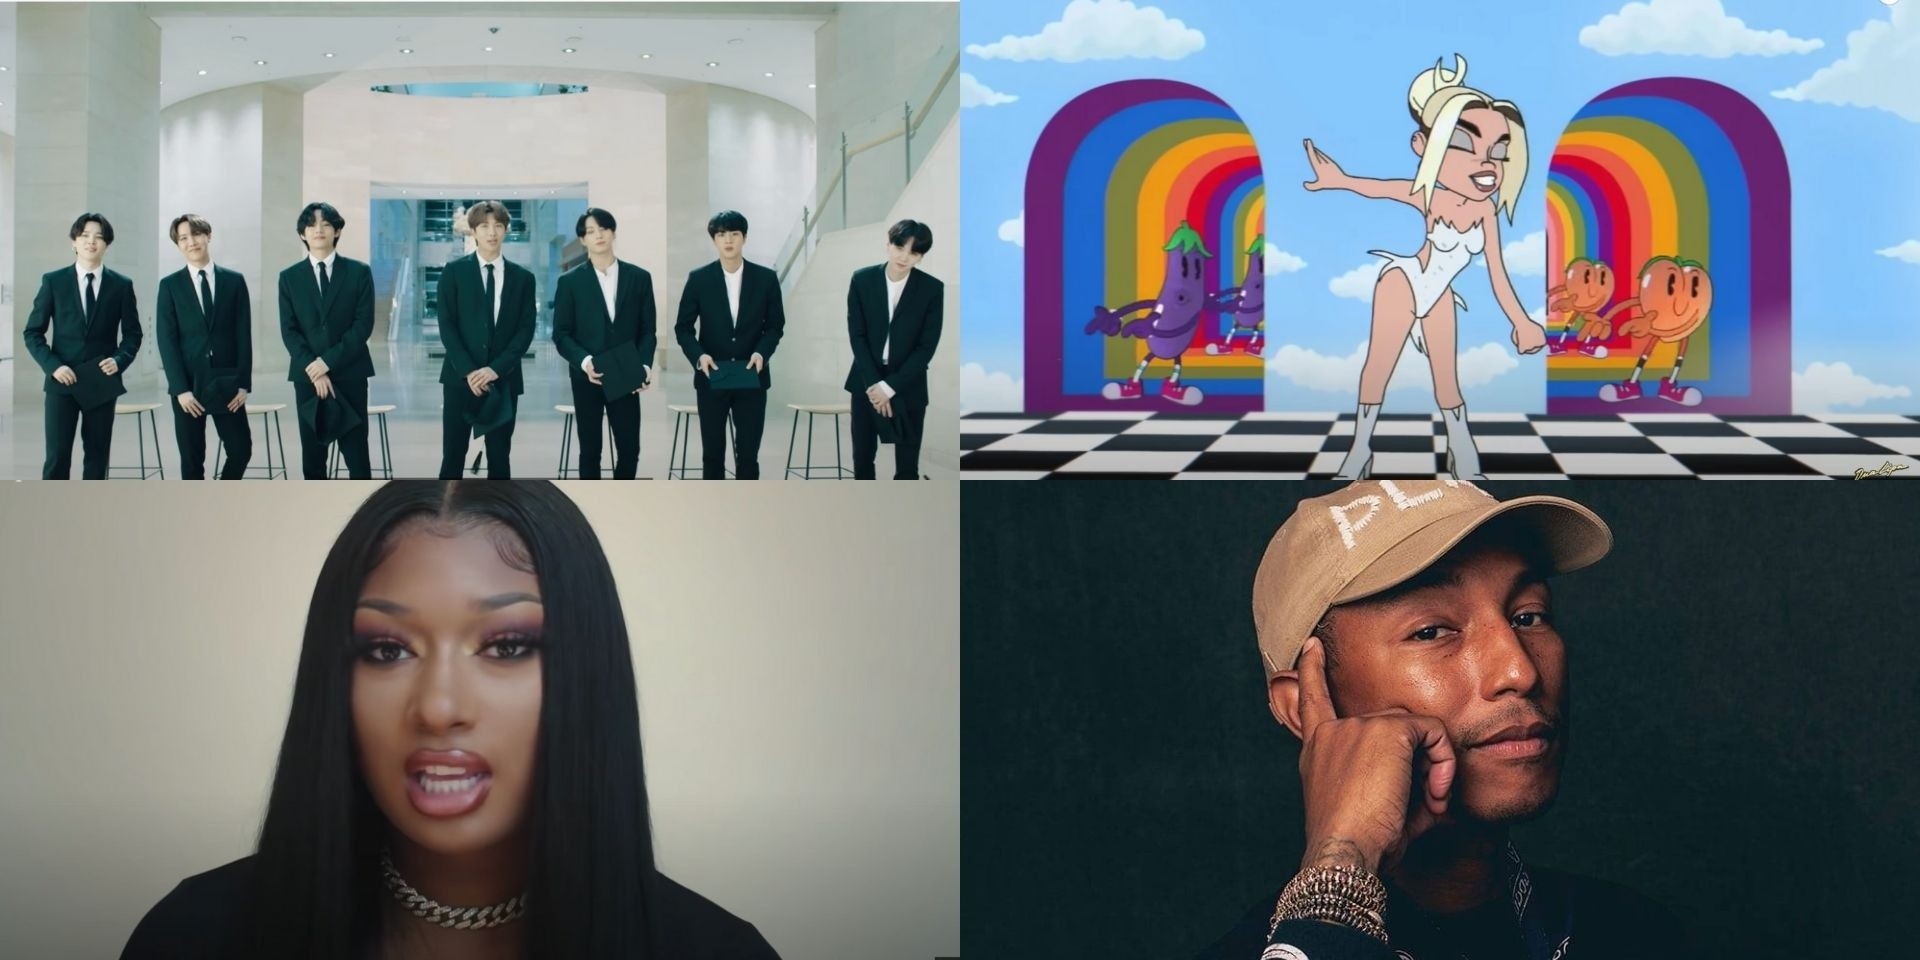 Here are the winners of the 2021 Webby Awards — including BTS, Dua Lipa, Megan Thee Stallion, Pharrell Williams, and more
